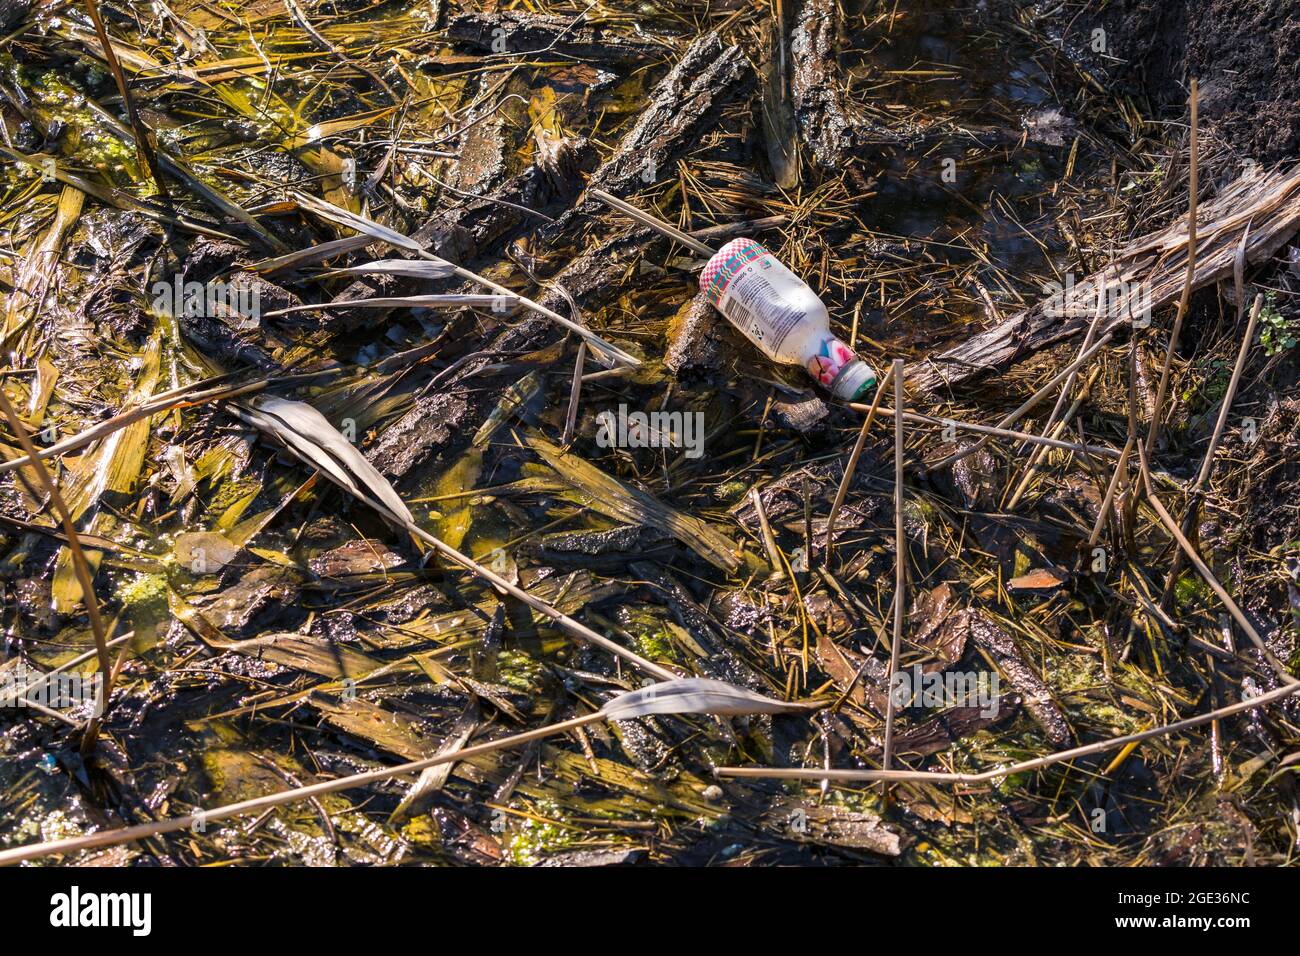 A plastic bottle pollutes a stream in a nature reserve Stock Photo